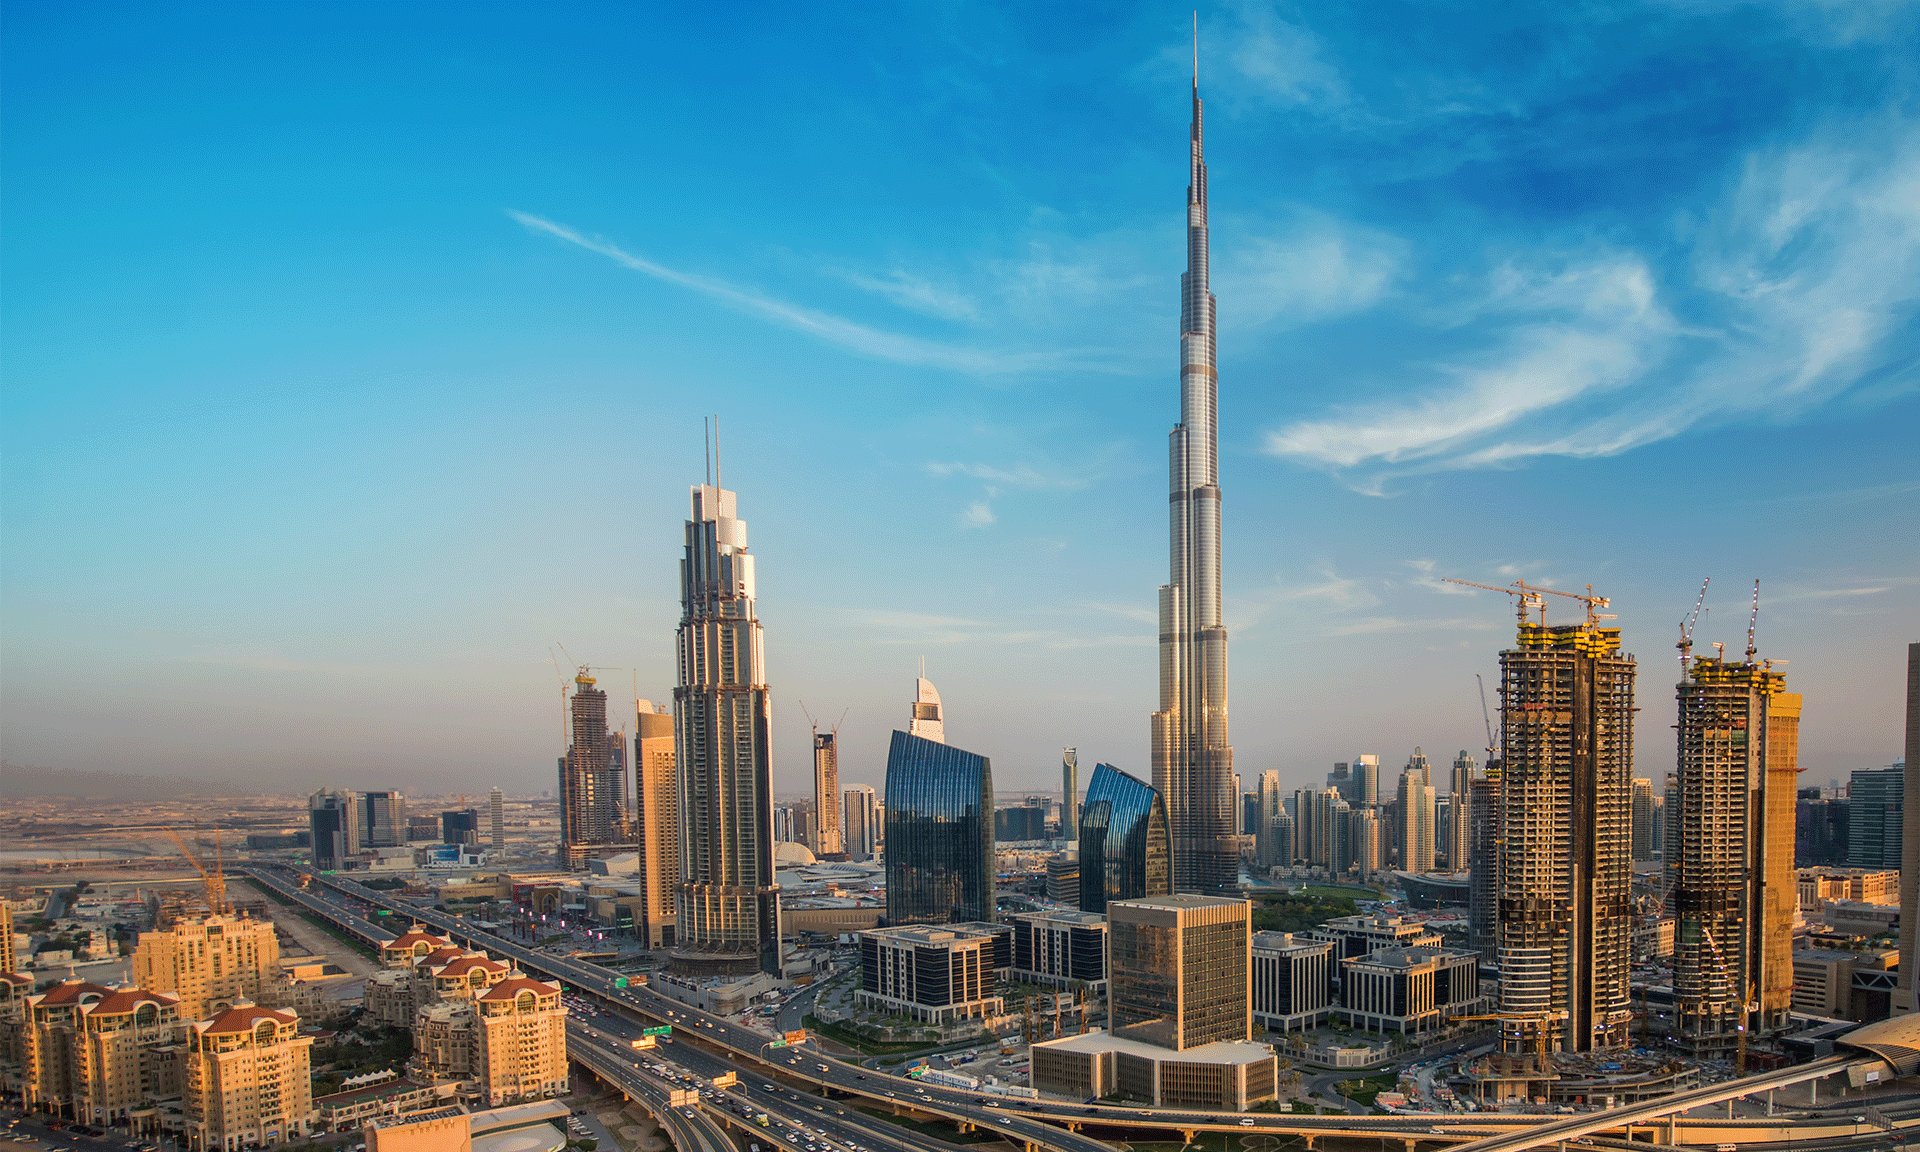 35 Percent More Business Licenses Issued – Investors Ramping it up in Dubai